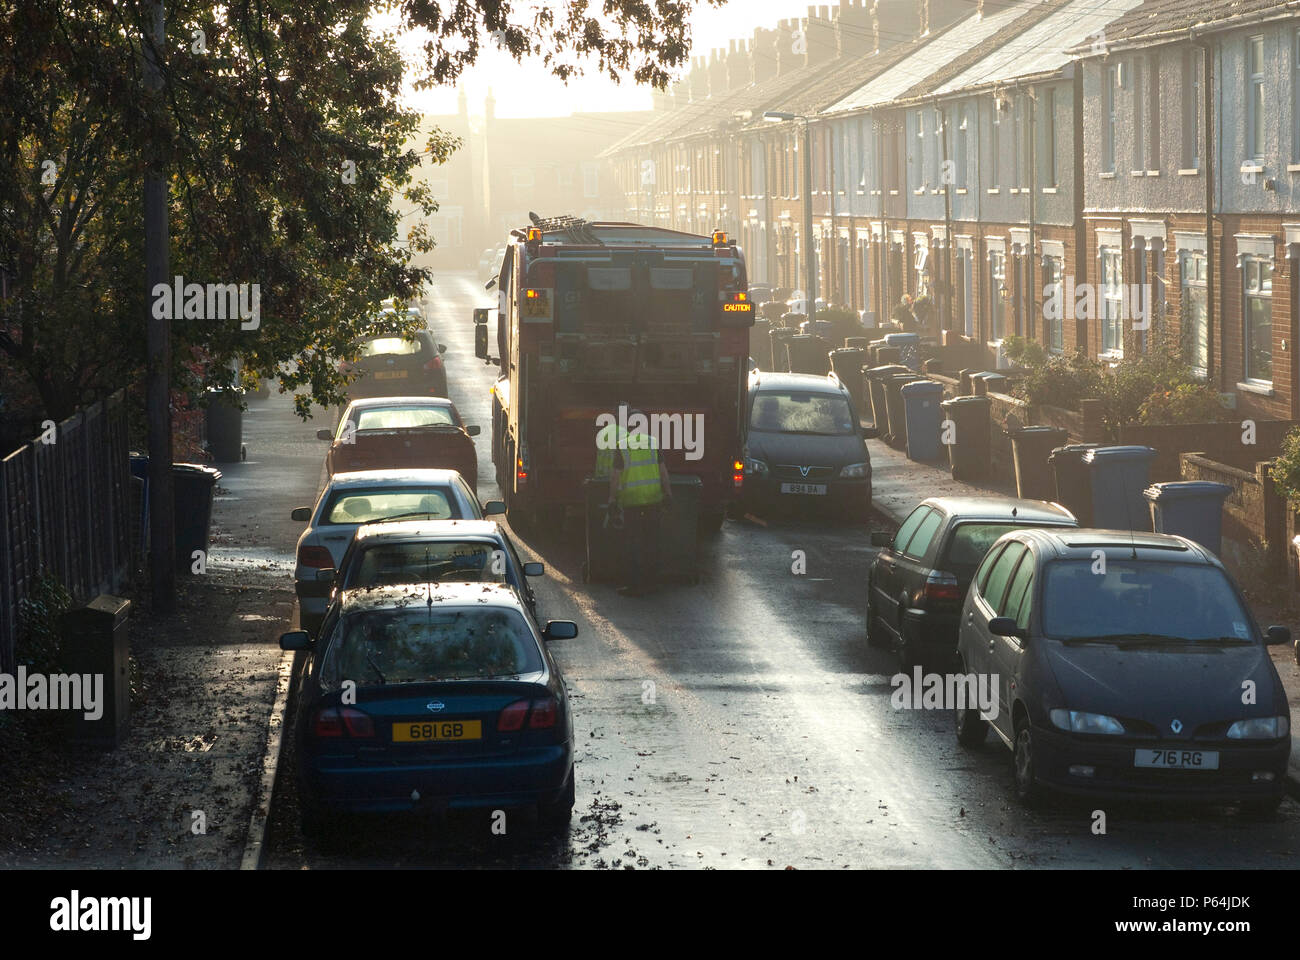 Early morning refuse collection from a residential street in Ipswich, Suffolk, UK Stock Photo